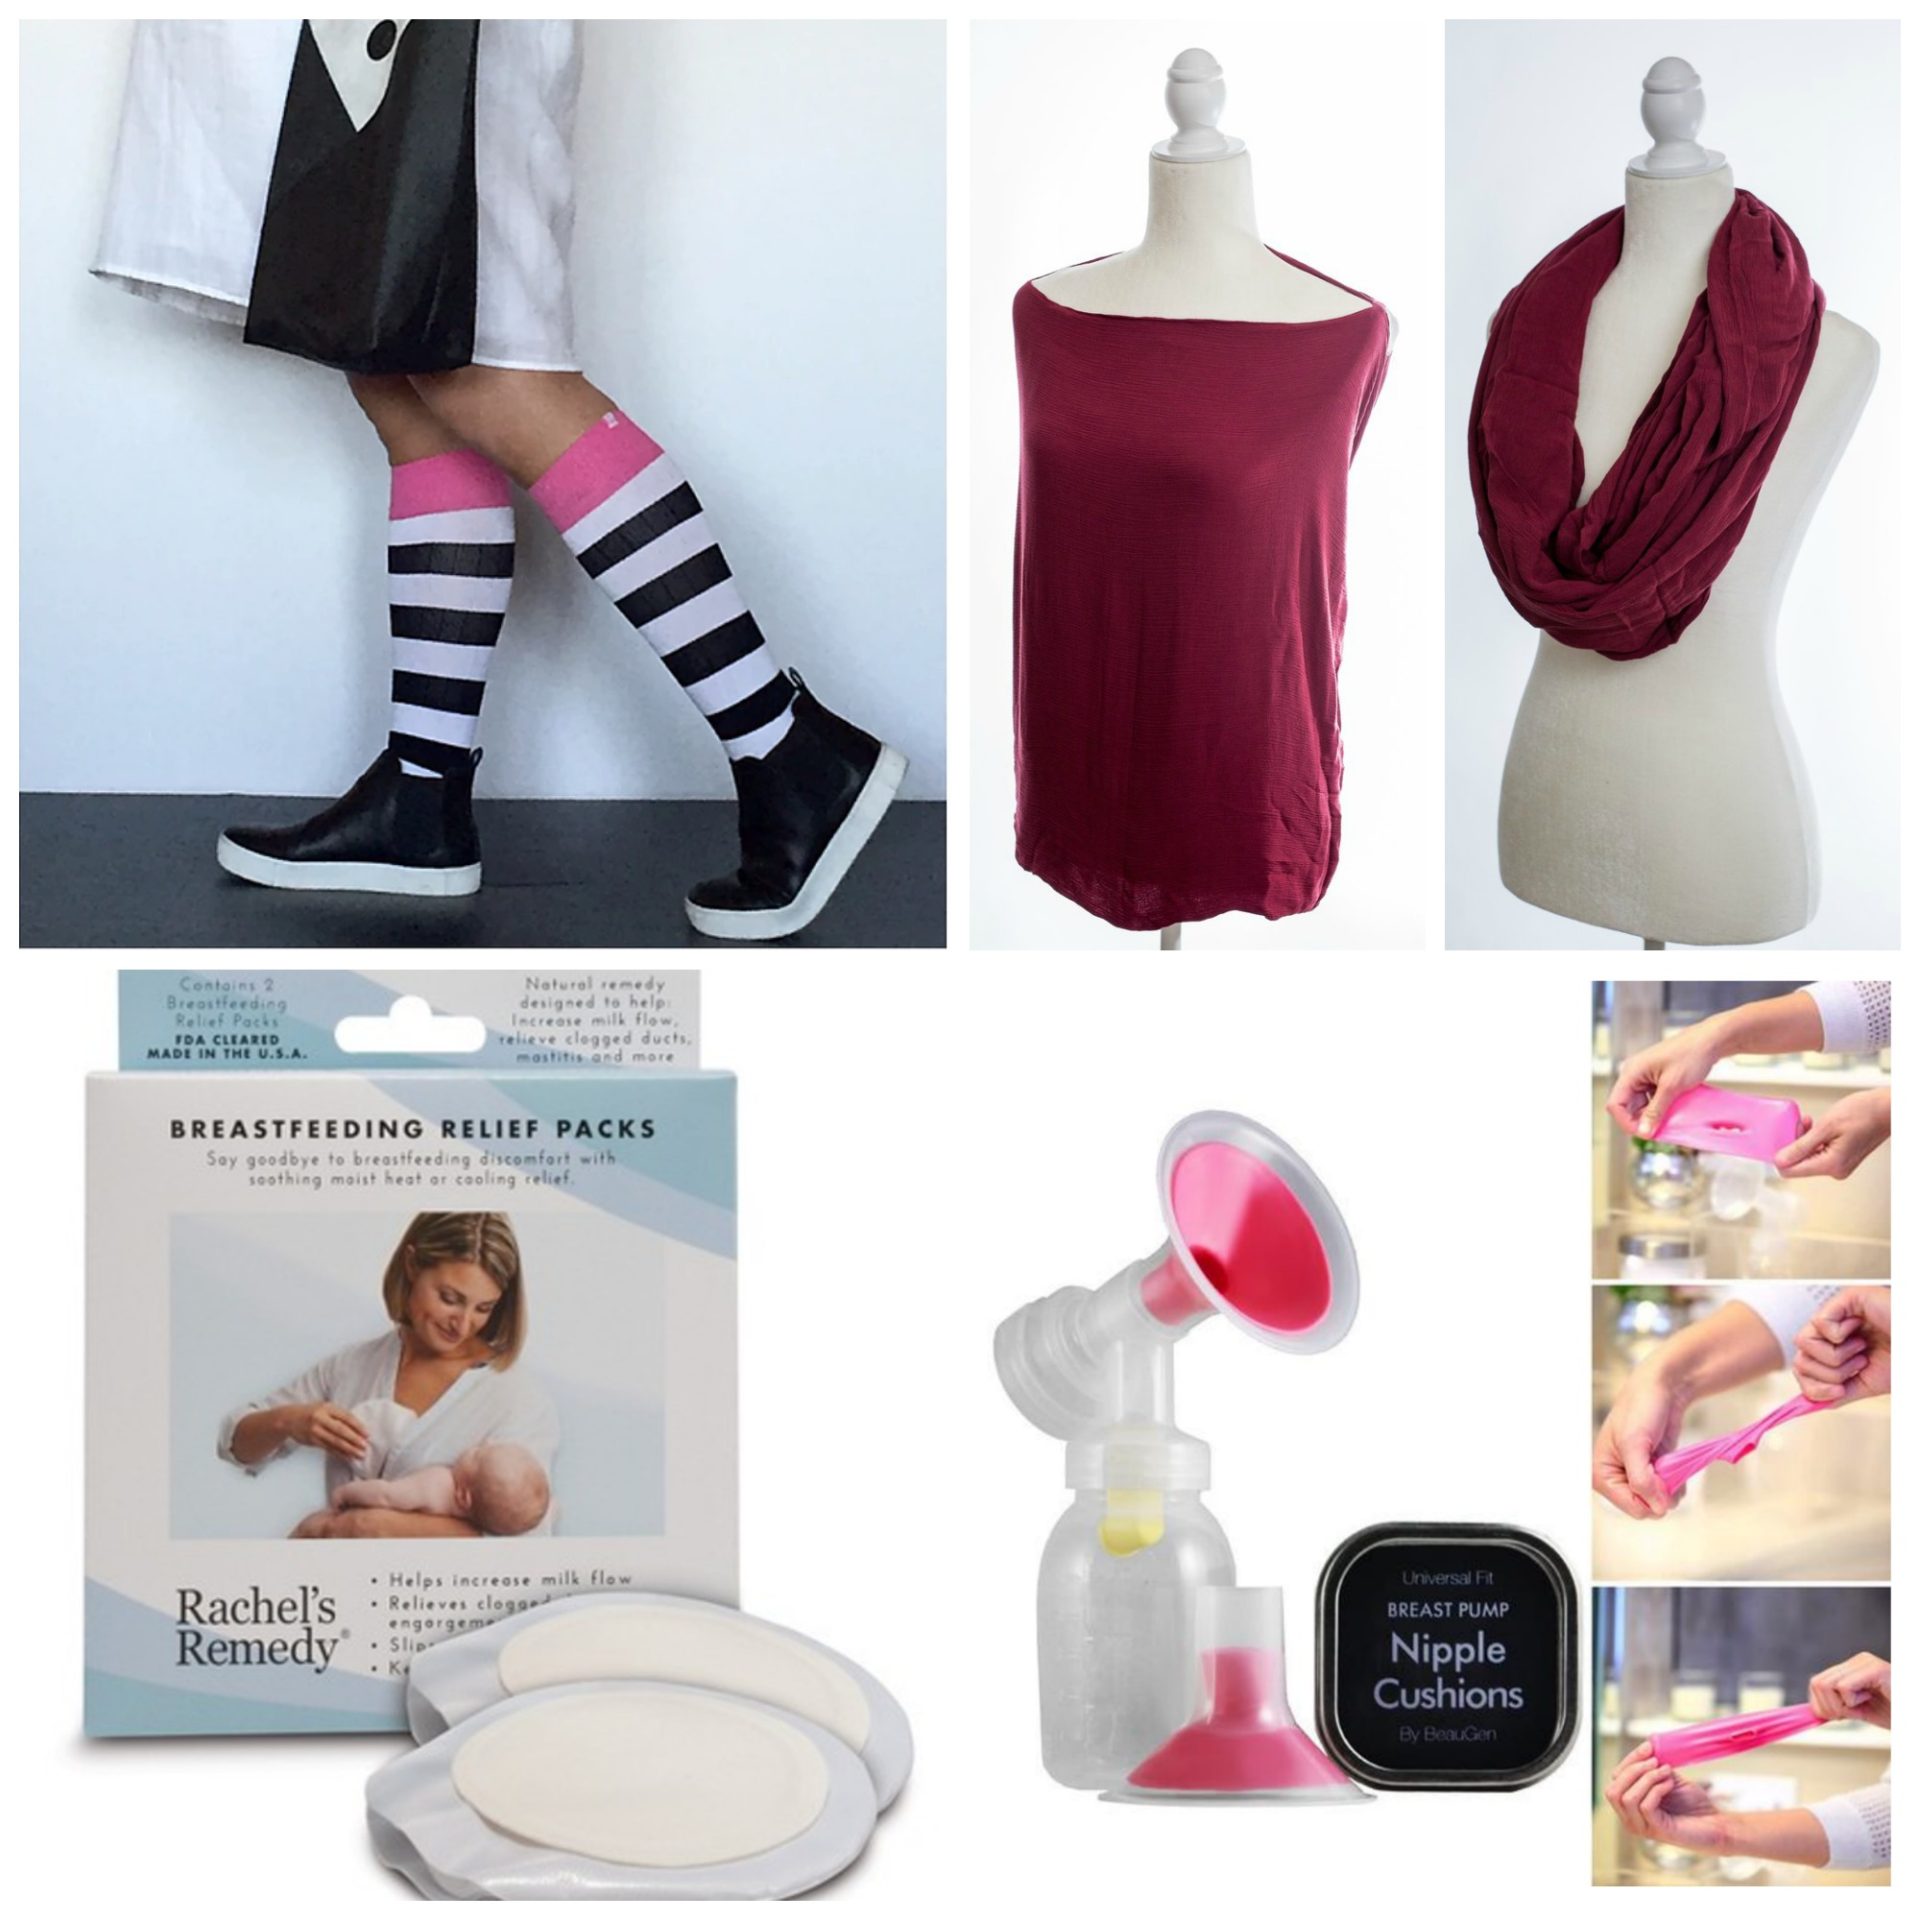 Last Minute Stocking Stuffer Ideas for Pregnant and Breastfeeding Mamas!